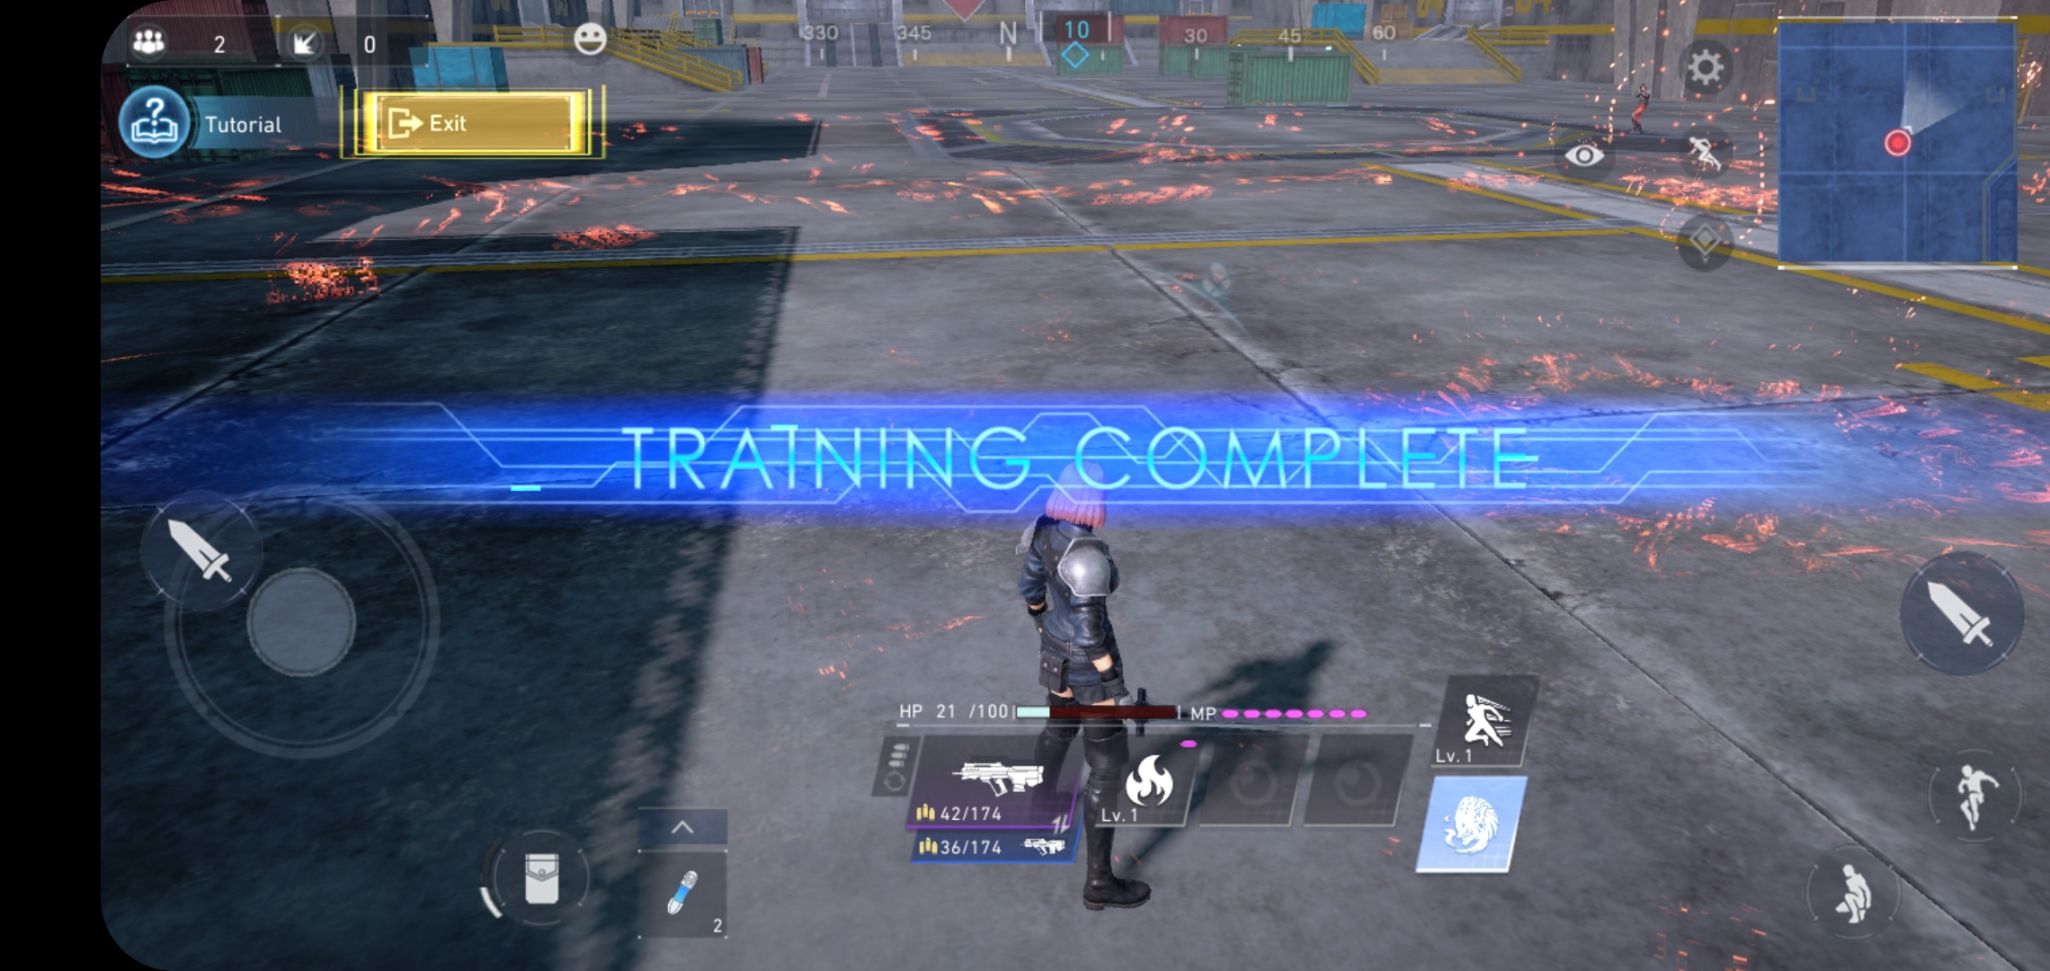 Completed all training tutorials 